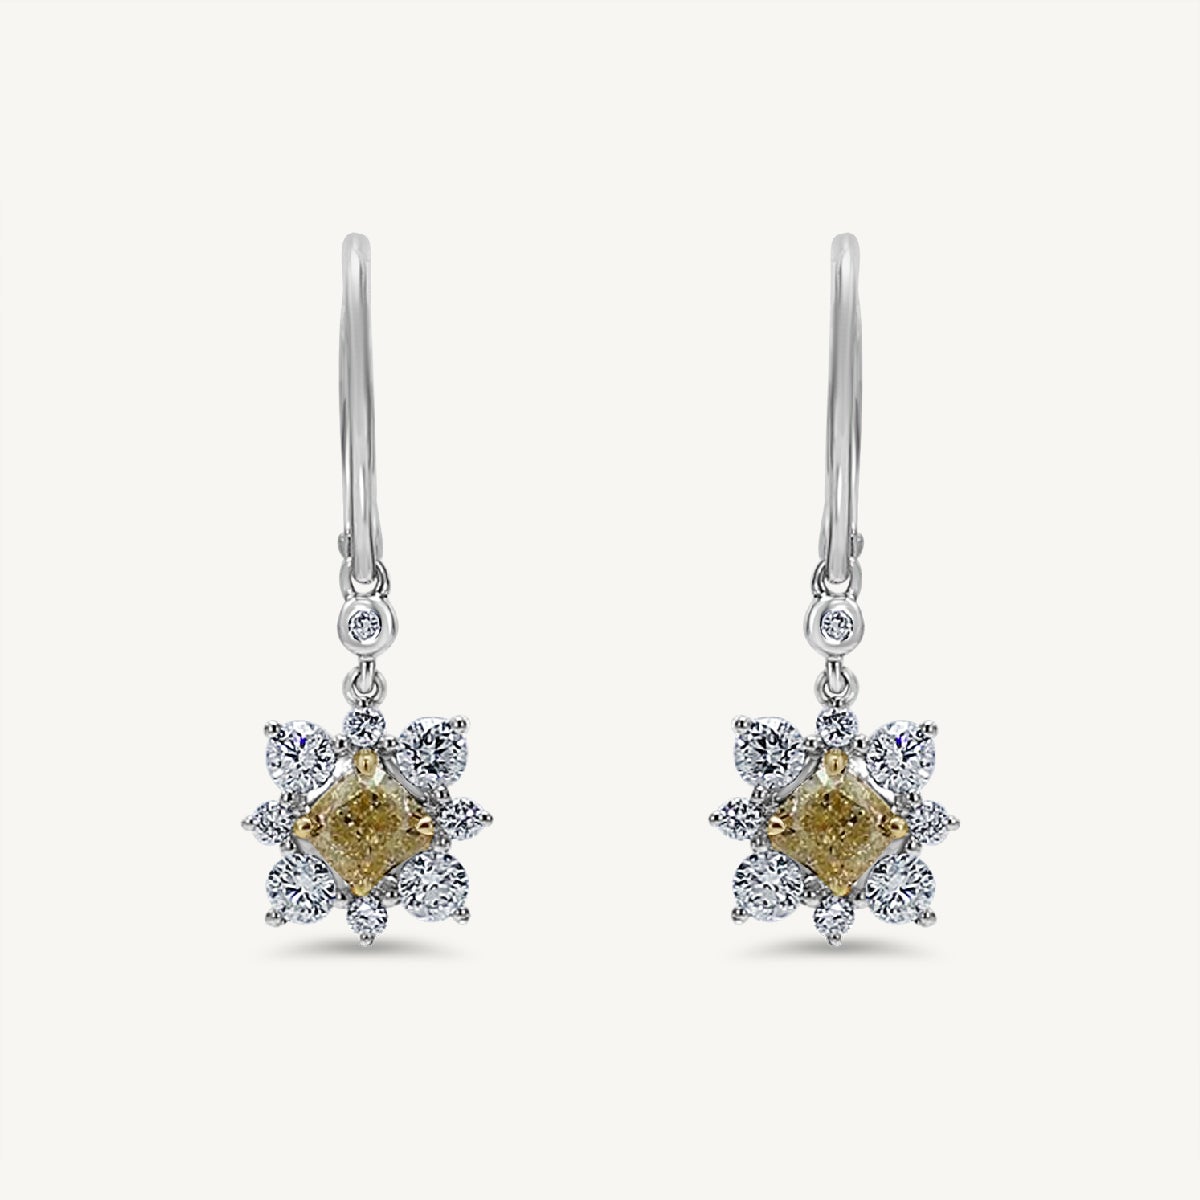 Natural Yellow Cushion and White Diamond 1.78 Carat TW Gold Drop Earrings